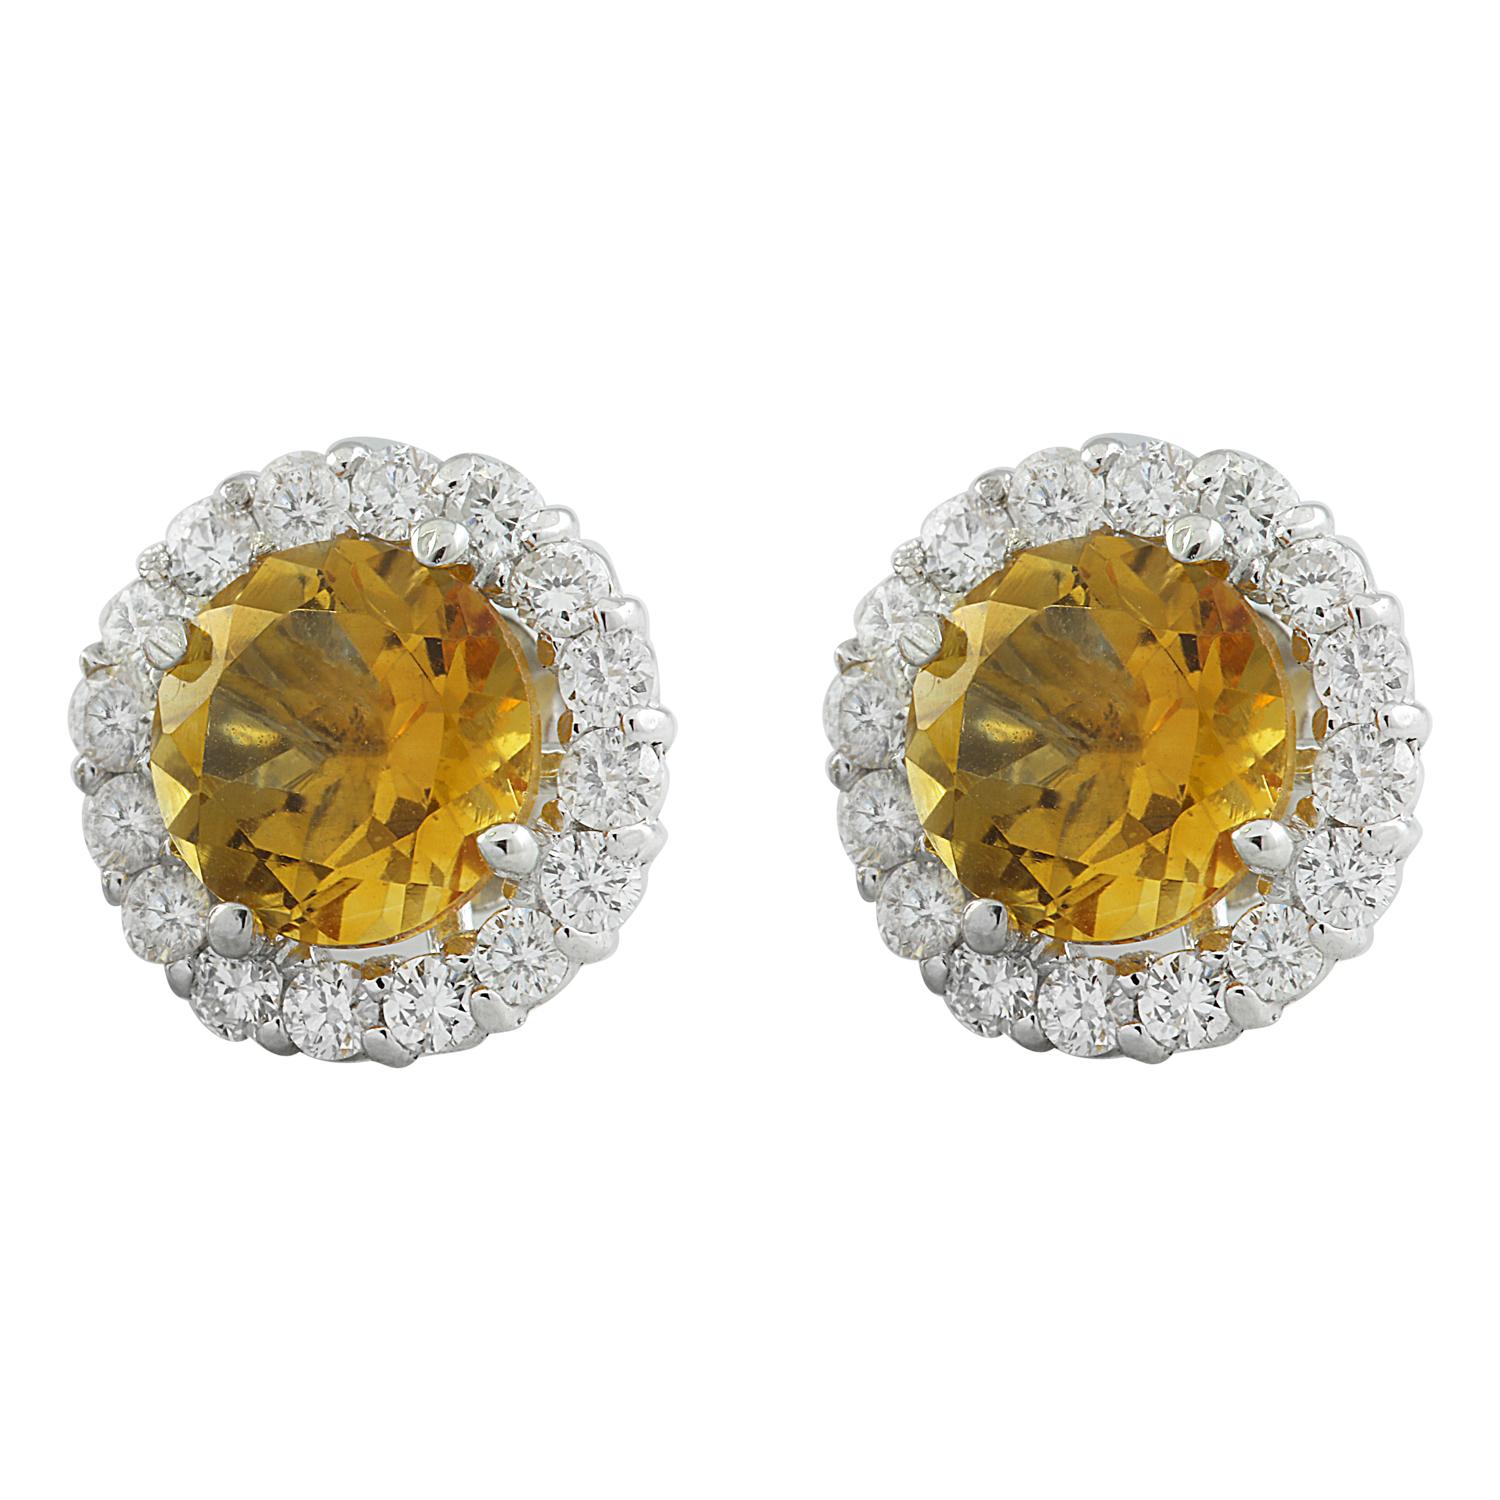 3.65 Carat Natural Citrine 14 Karat Solid White Gold Diamond Earrings
Stamped: 14K 
Total Earrings Weight: 1.5 Grams 
Citrine Weight: 3.00 Carat (7.00x7.00 Millimeters)  
Diamond Weight: 0.65 Carat (F-G Color, VS2-SI1 Clarity )
Quantity: 32
Face